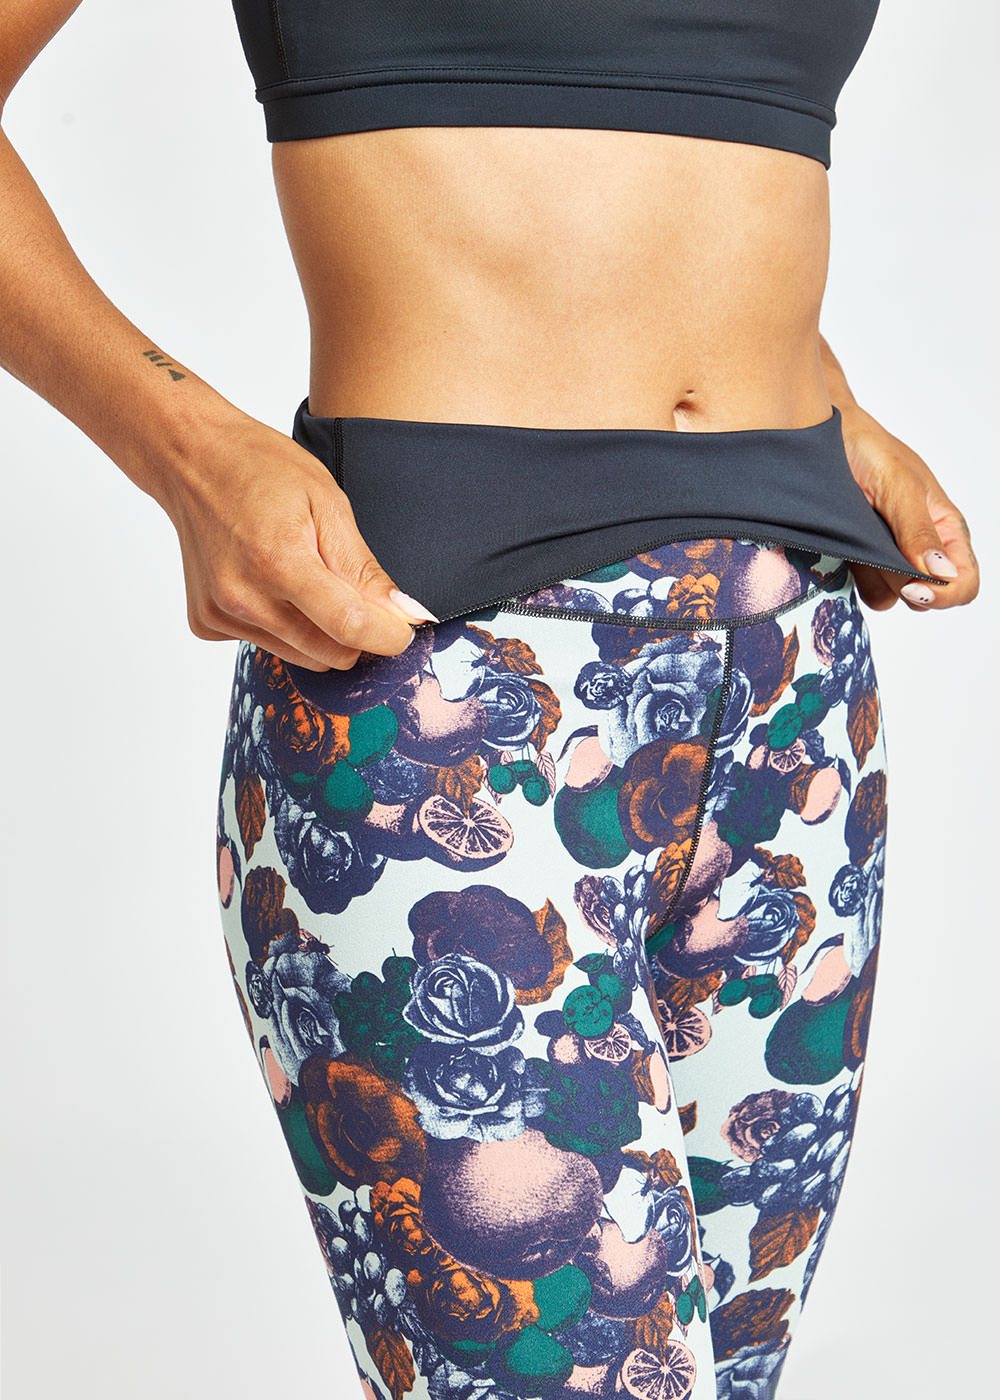 Oiselle, Roll with it Bird Hug Tights, Reversible